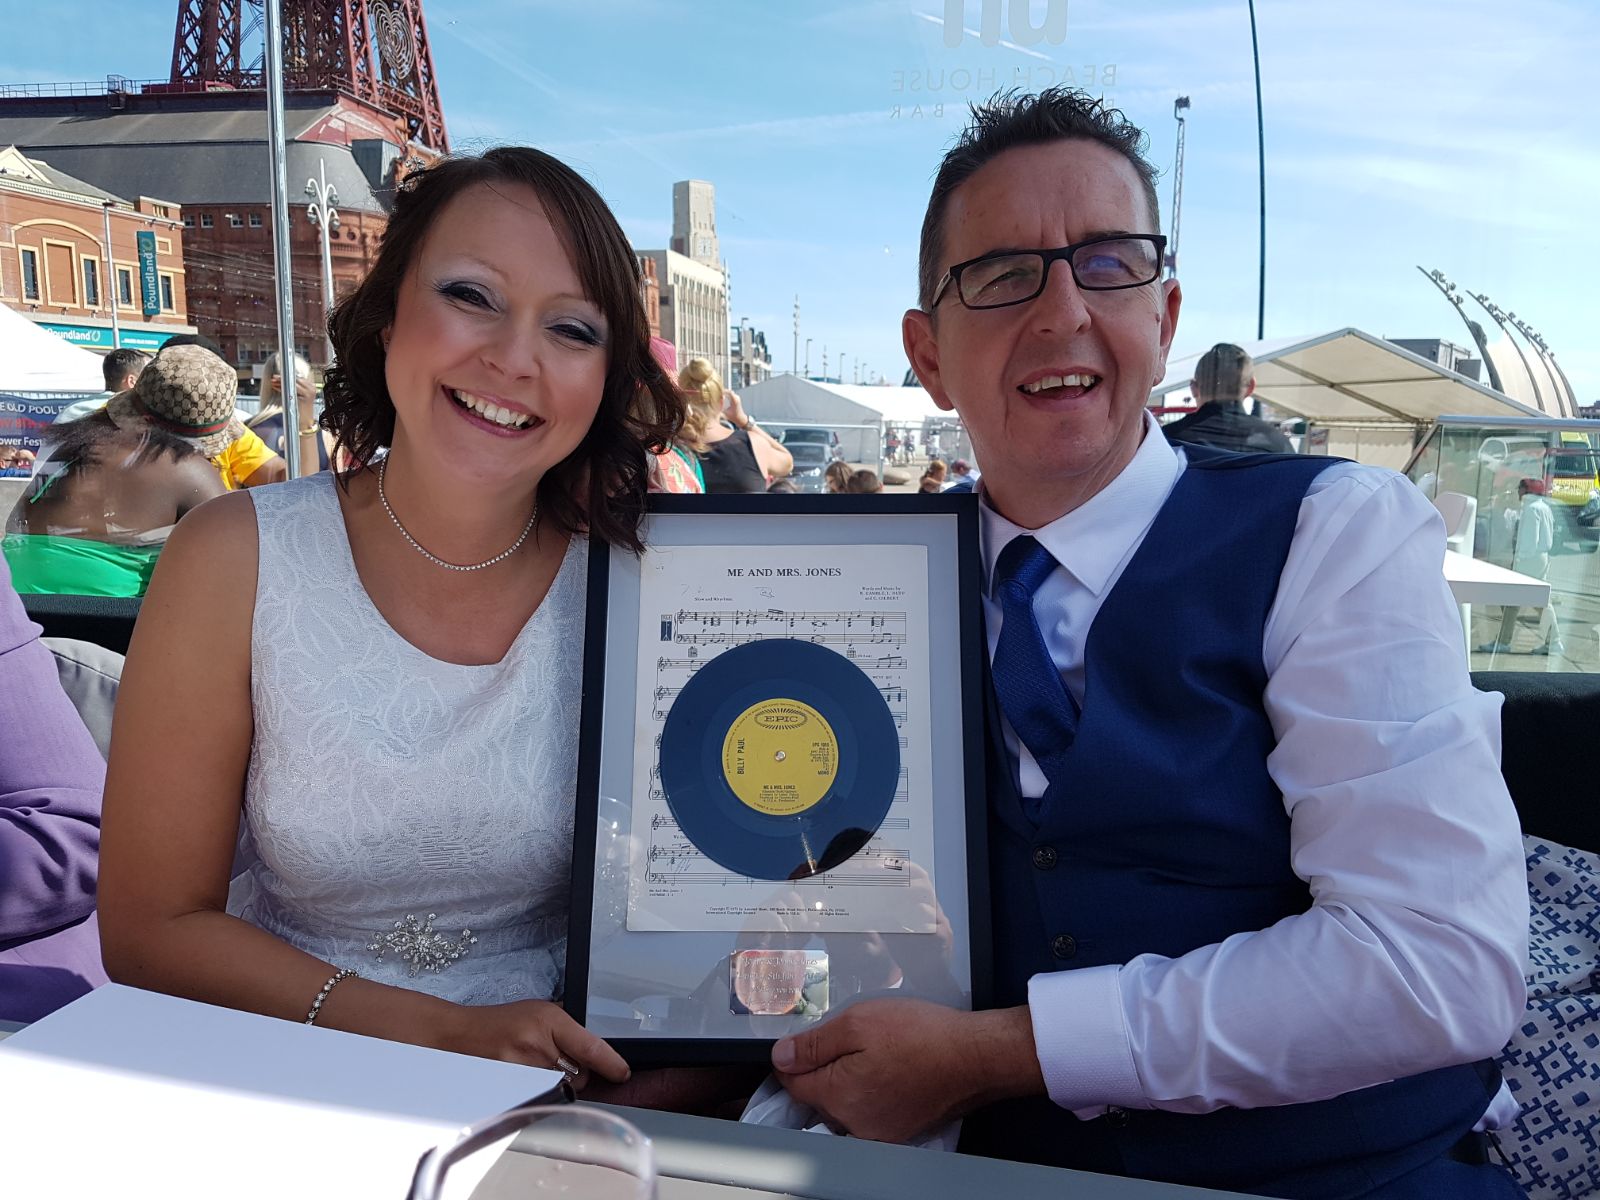 Local Couple Marry in Blackpool